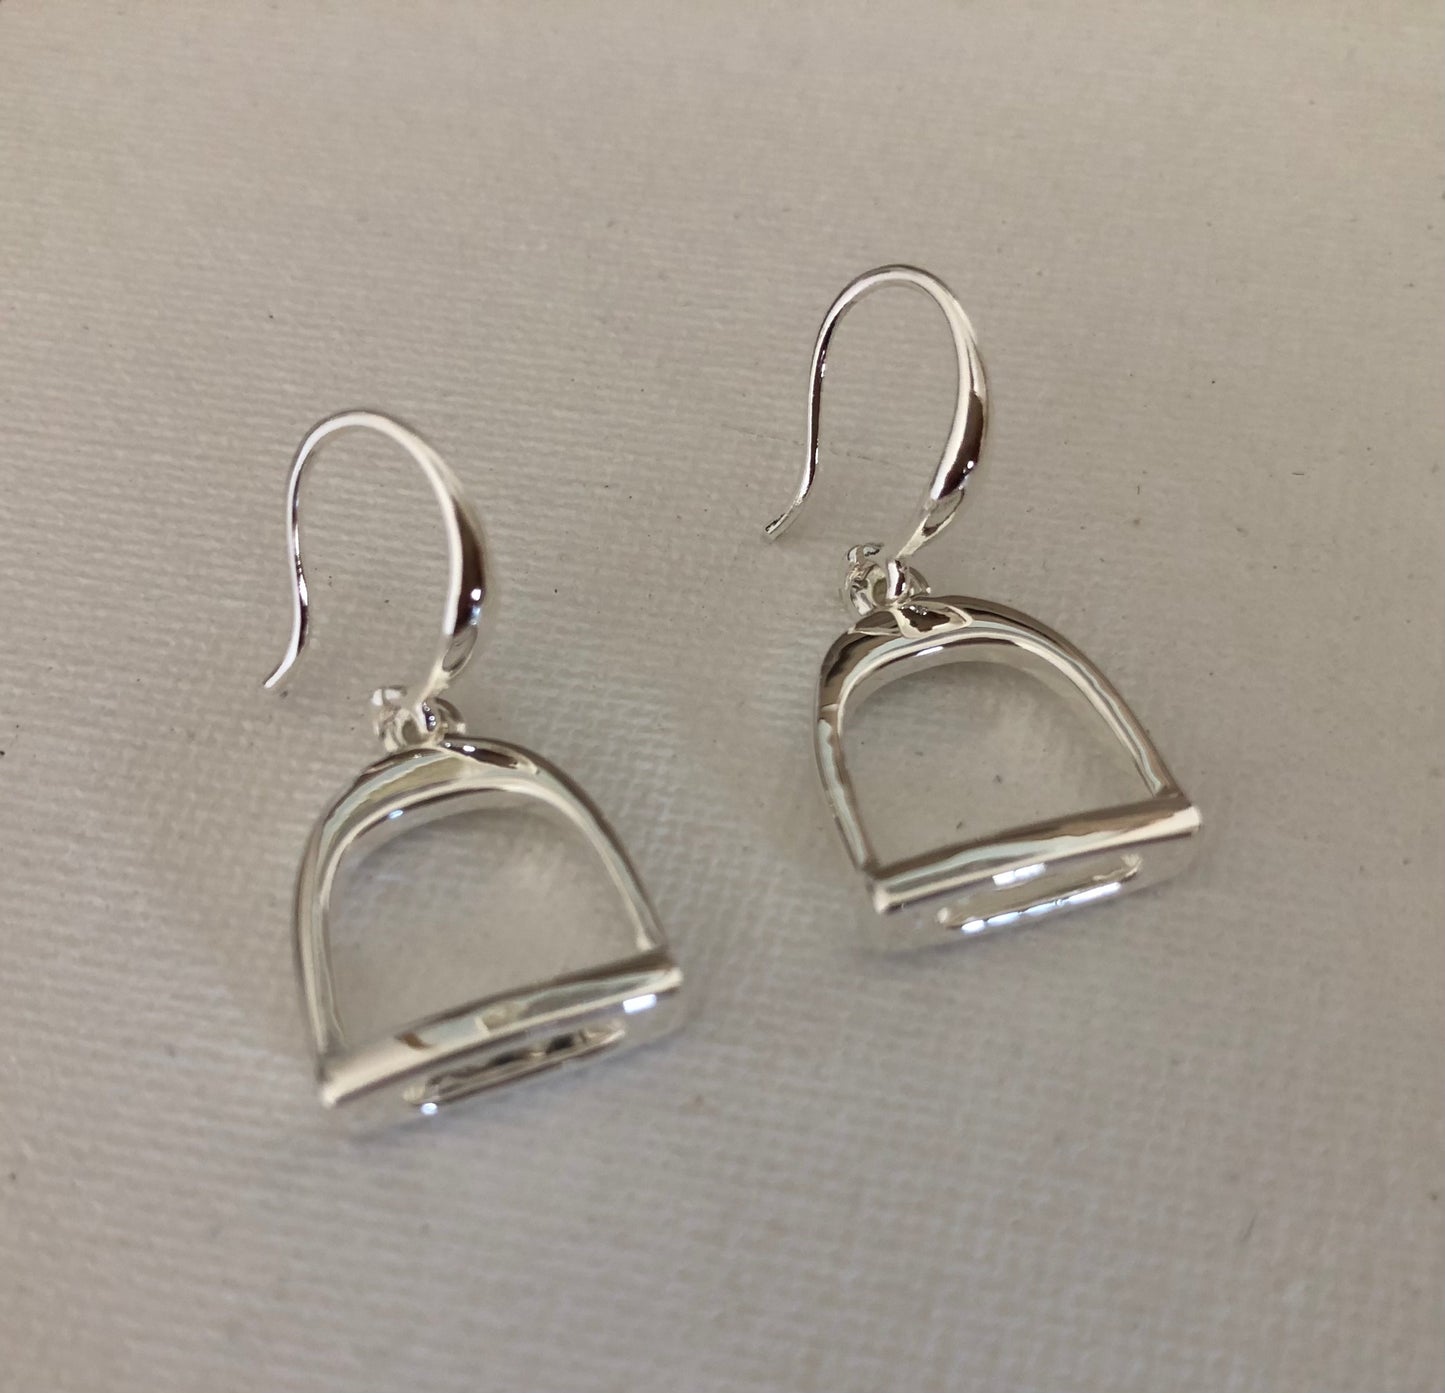 English Saddle Stirrup Earrings WIRE on CARD